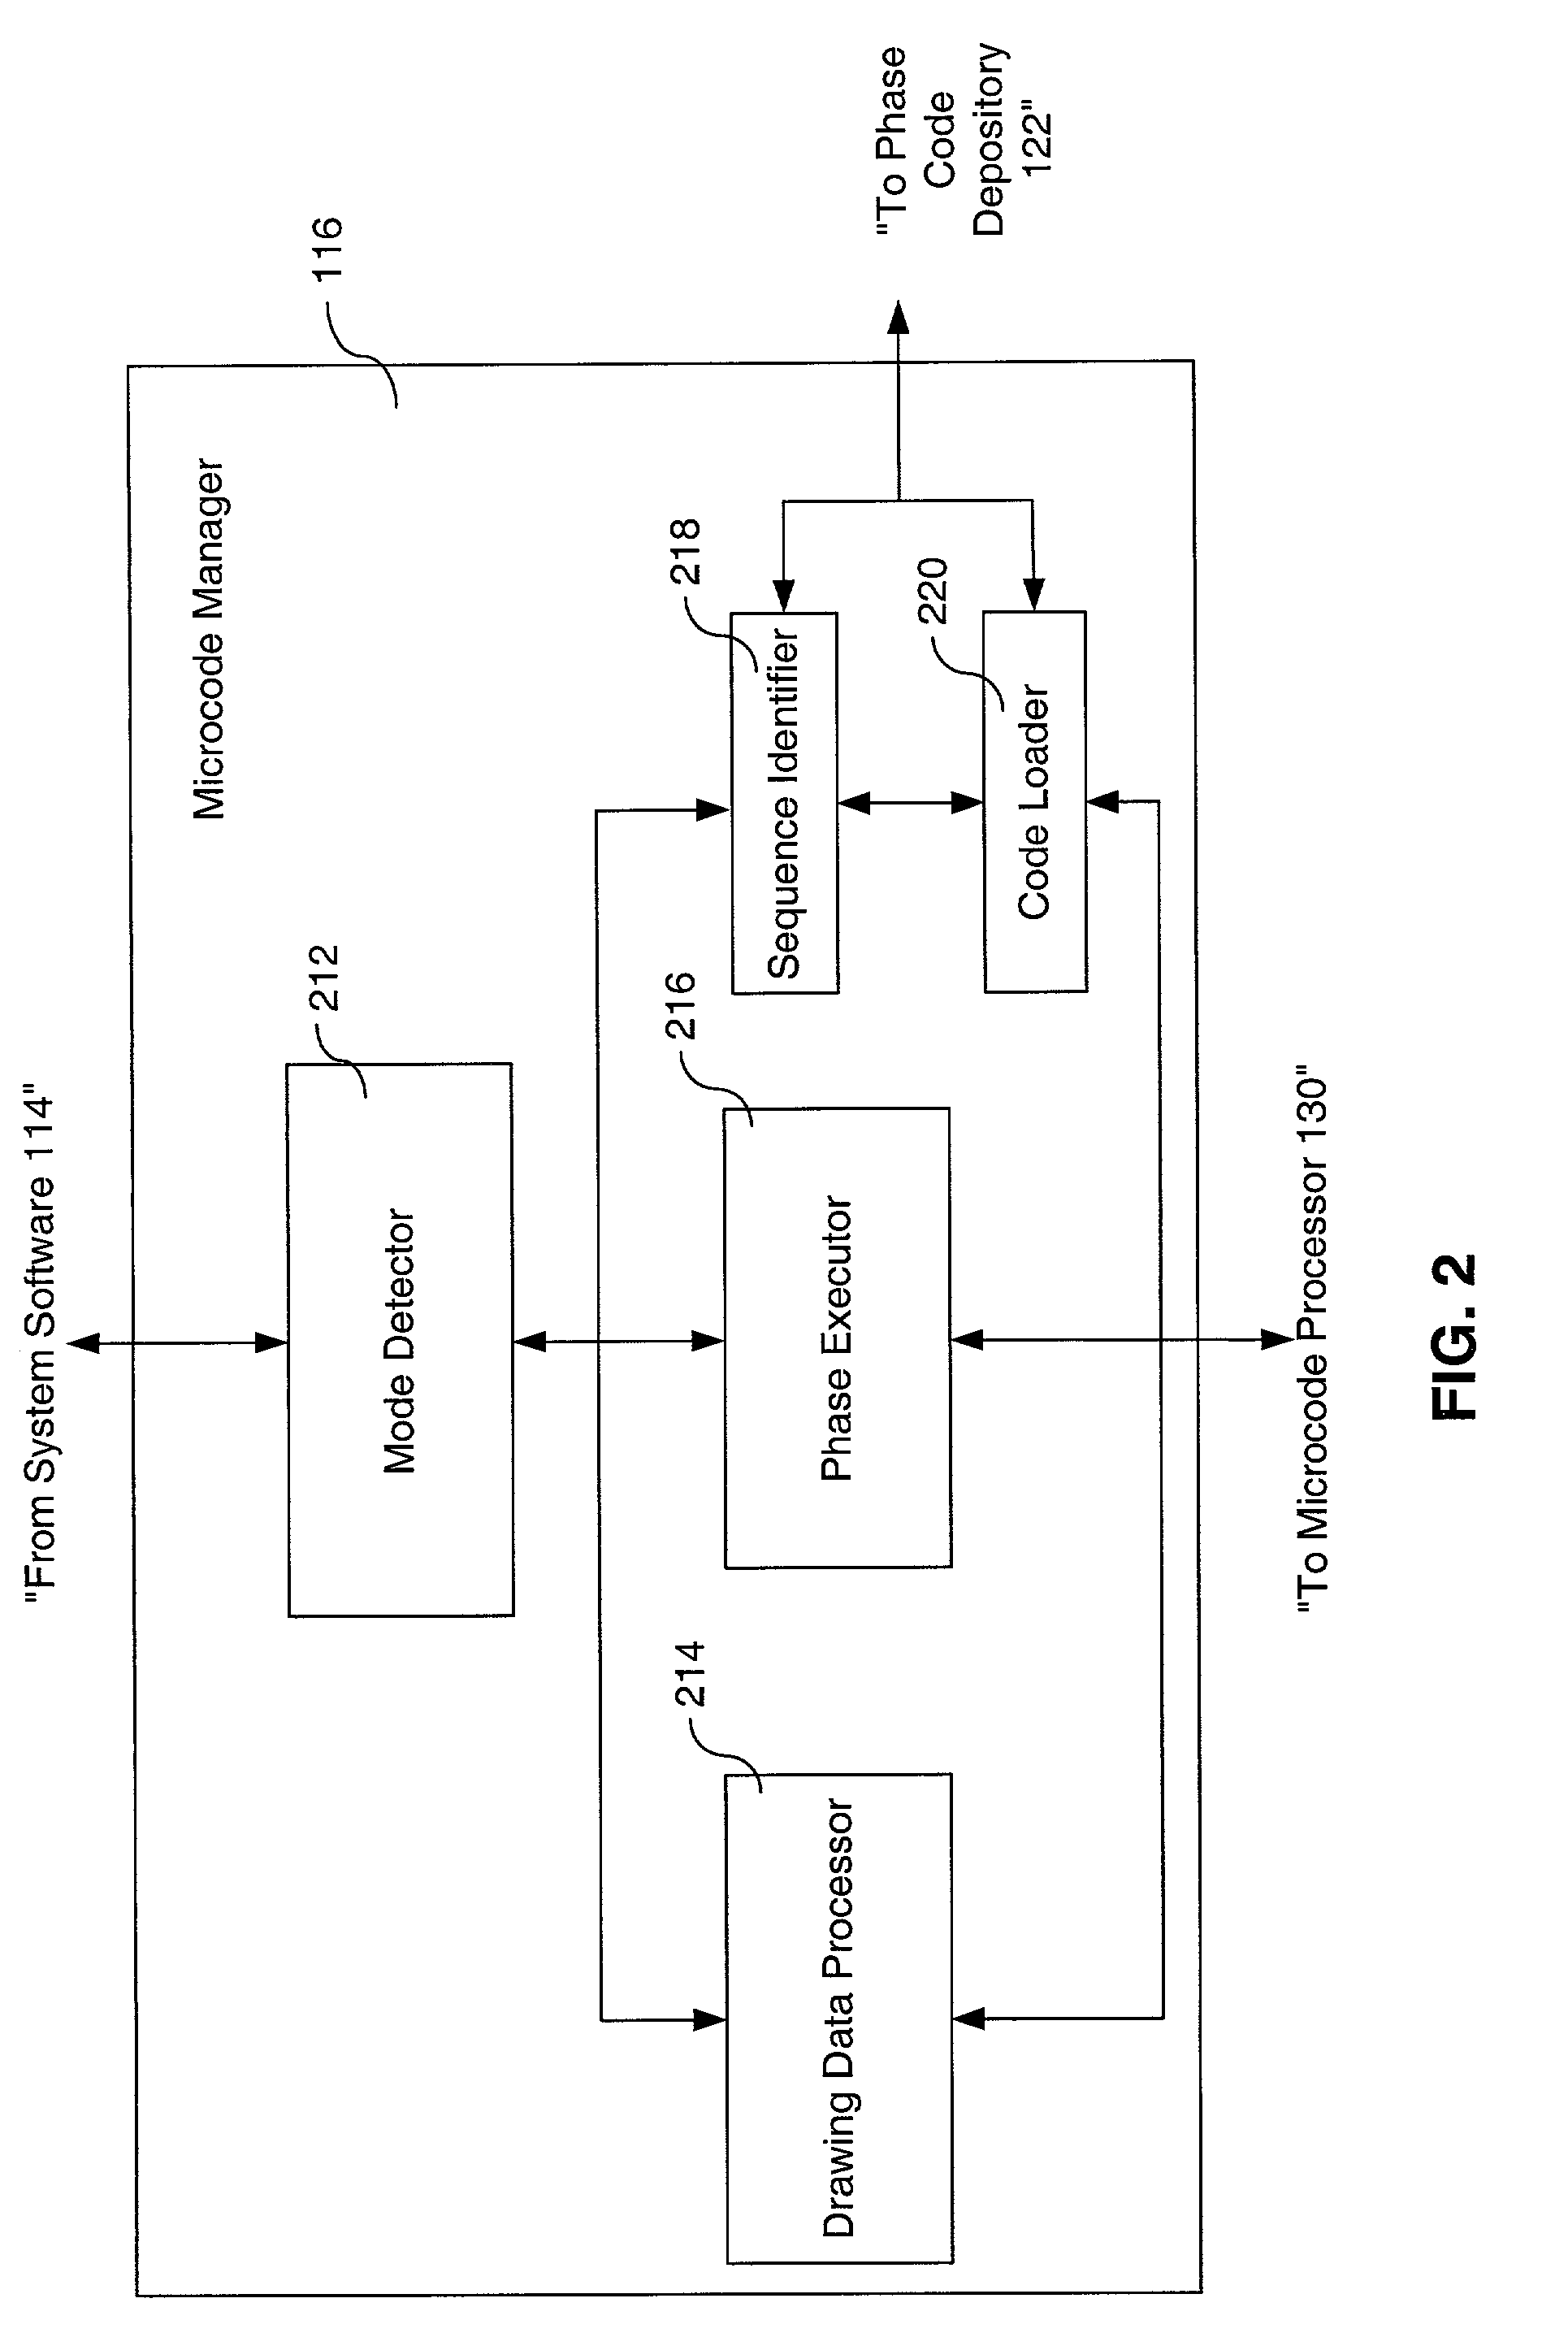 Method, system and computer program product for efficiently utilizing limited resources in a graphics device